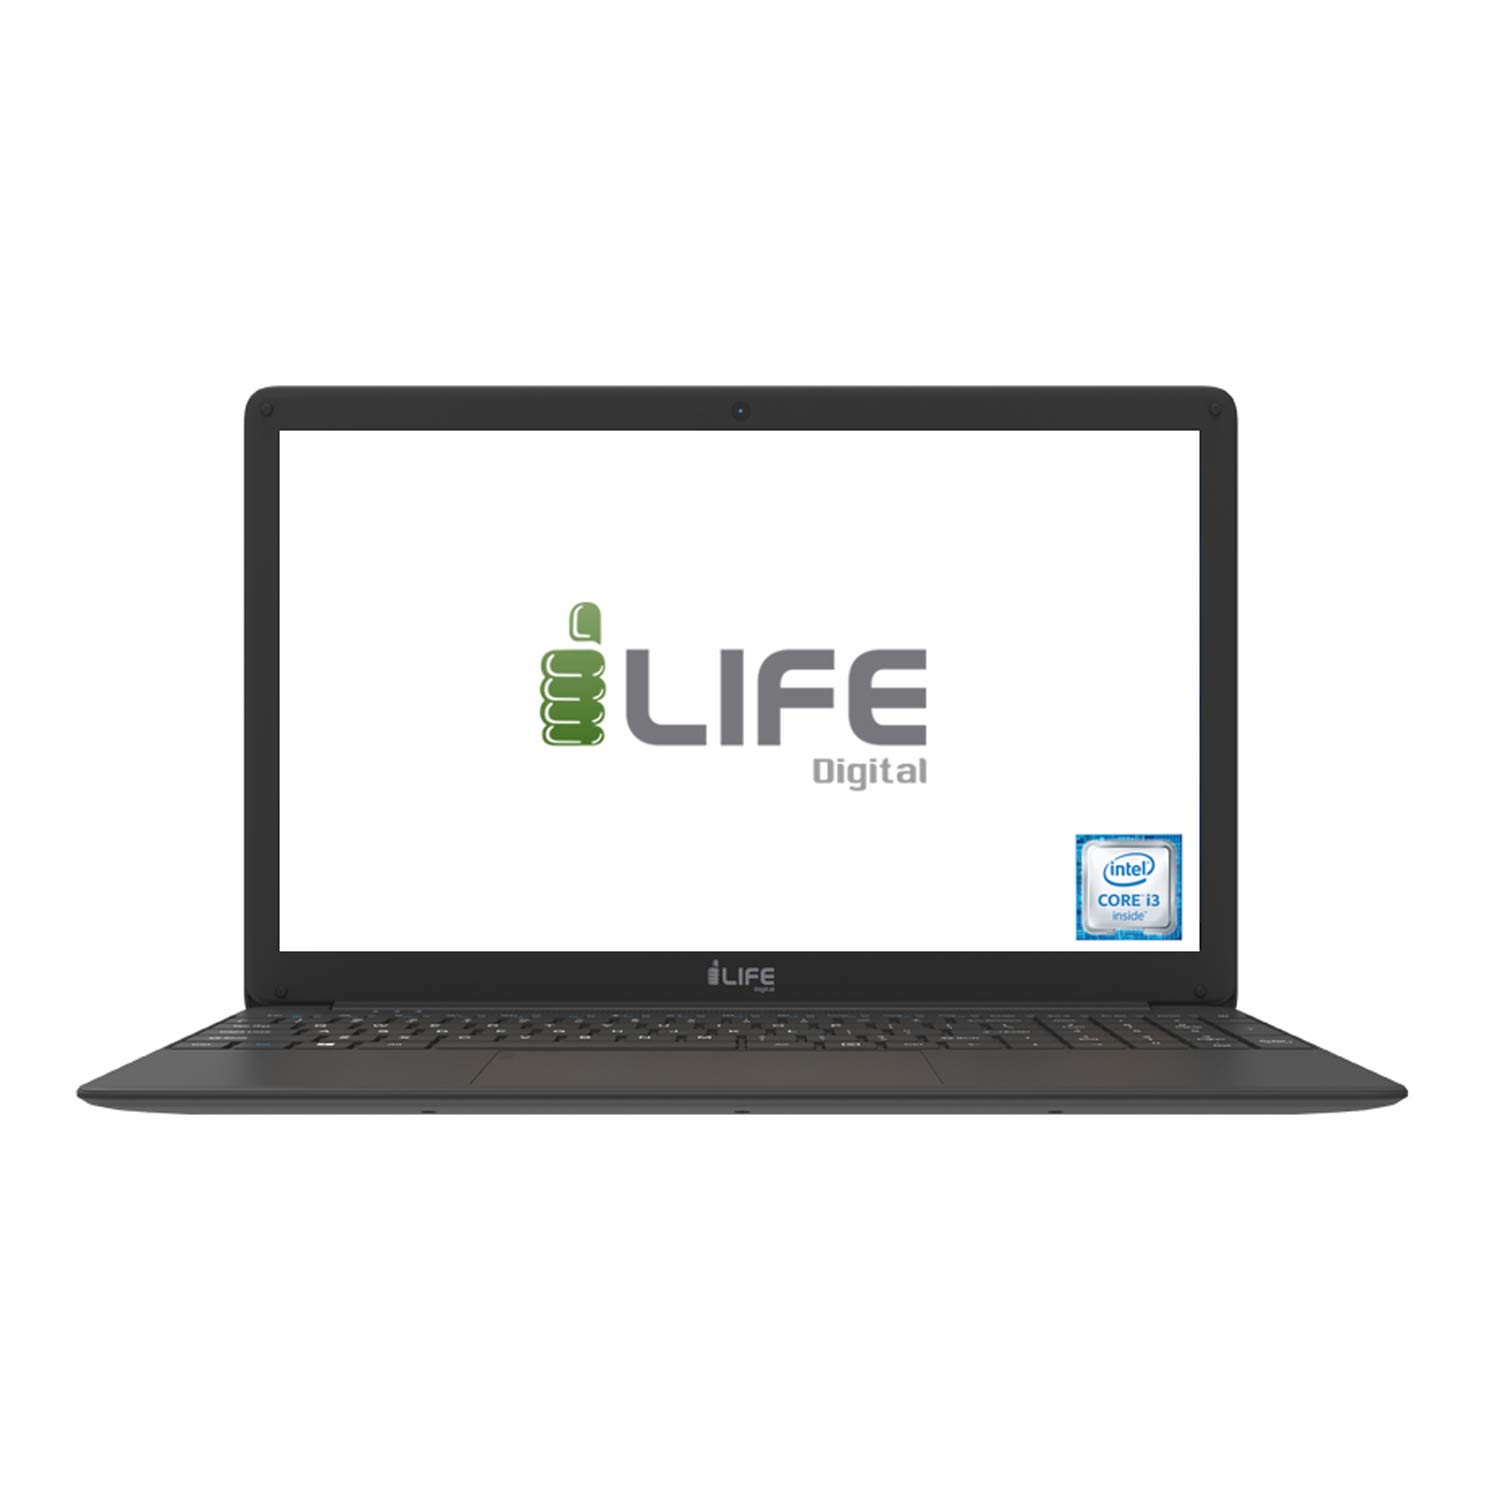 iLife Zed Air CX3 5th Gen “Core i3” 2.00GHz 4GB RAM 1TB HDD Bad Battery And Hinge Damage Black